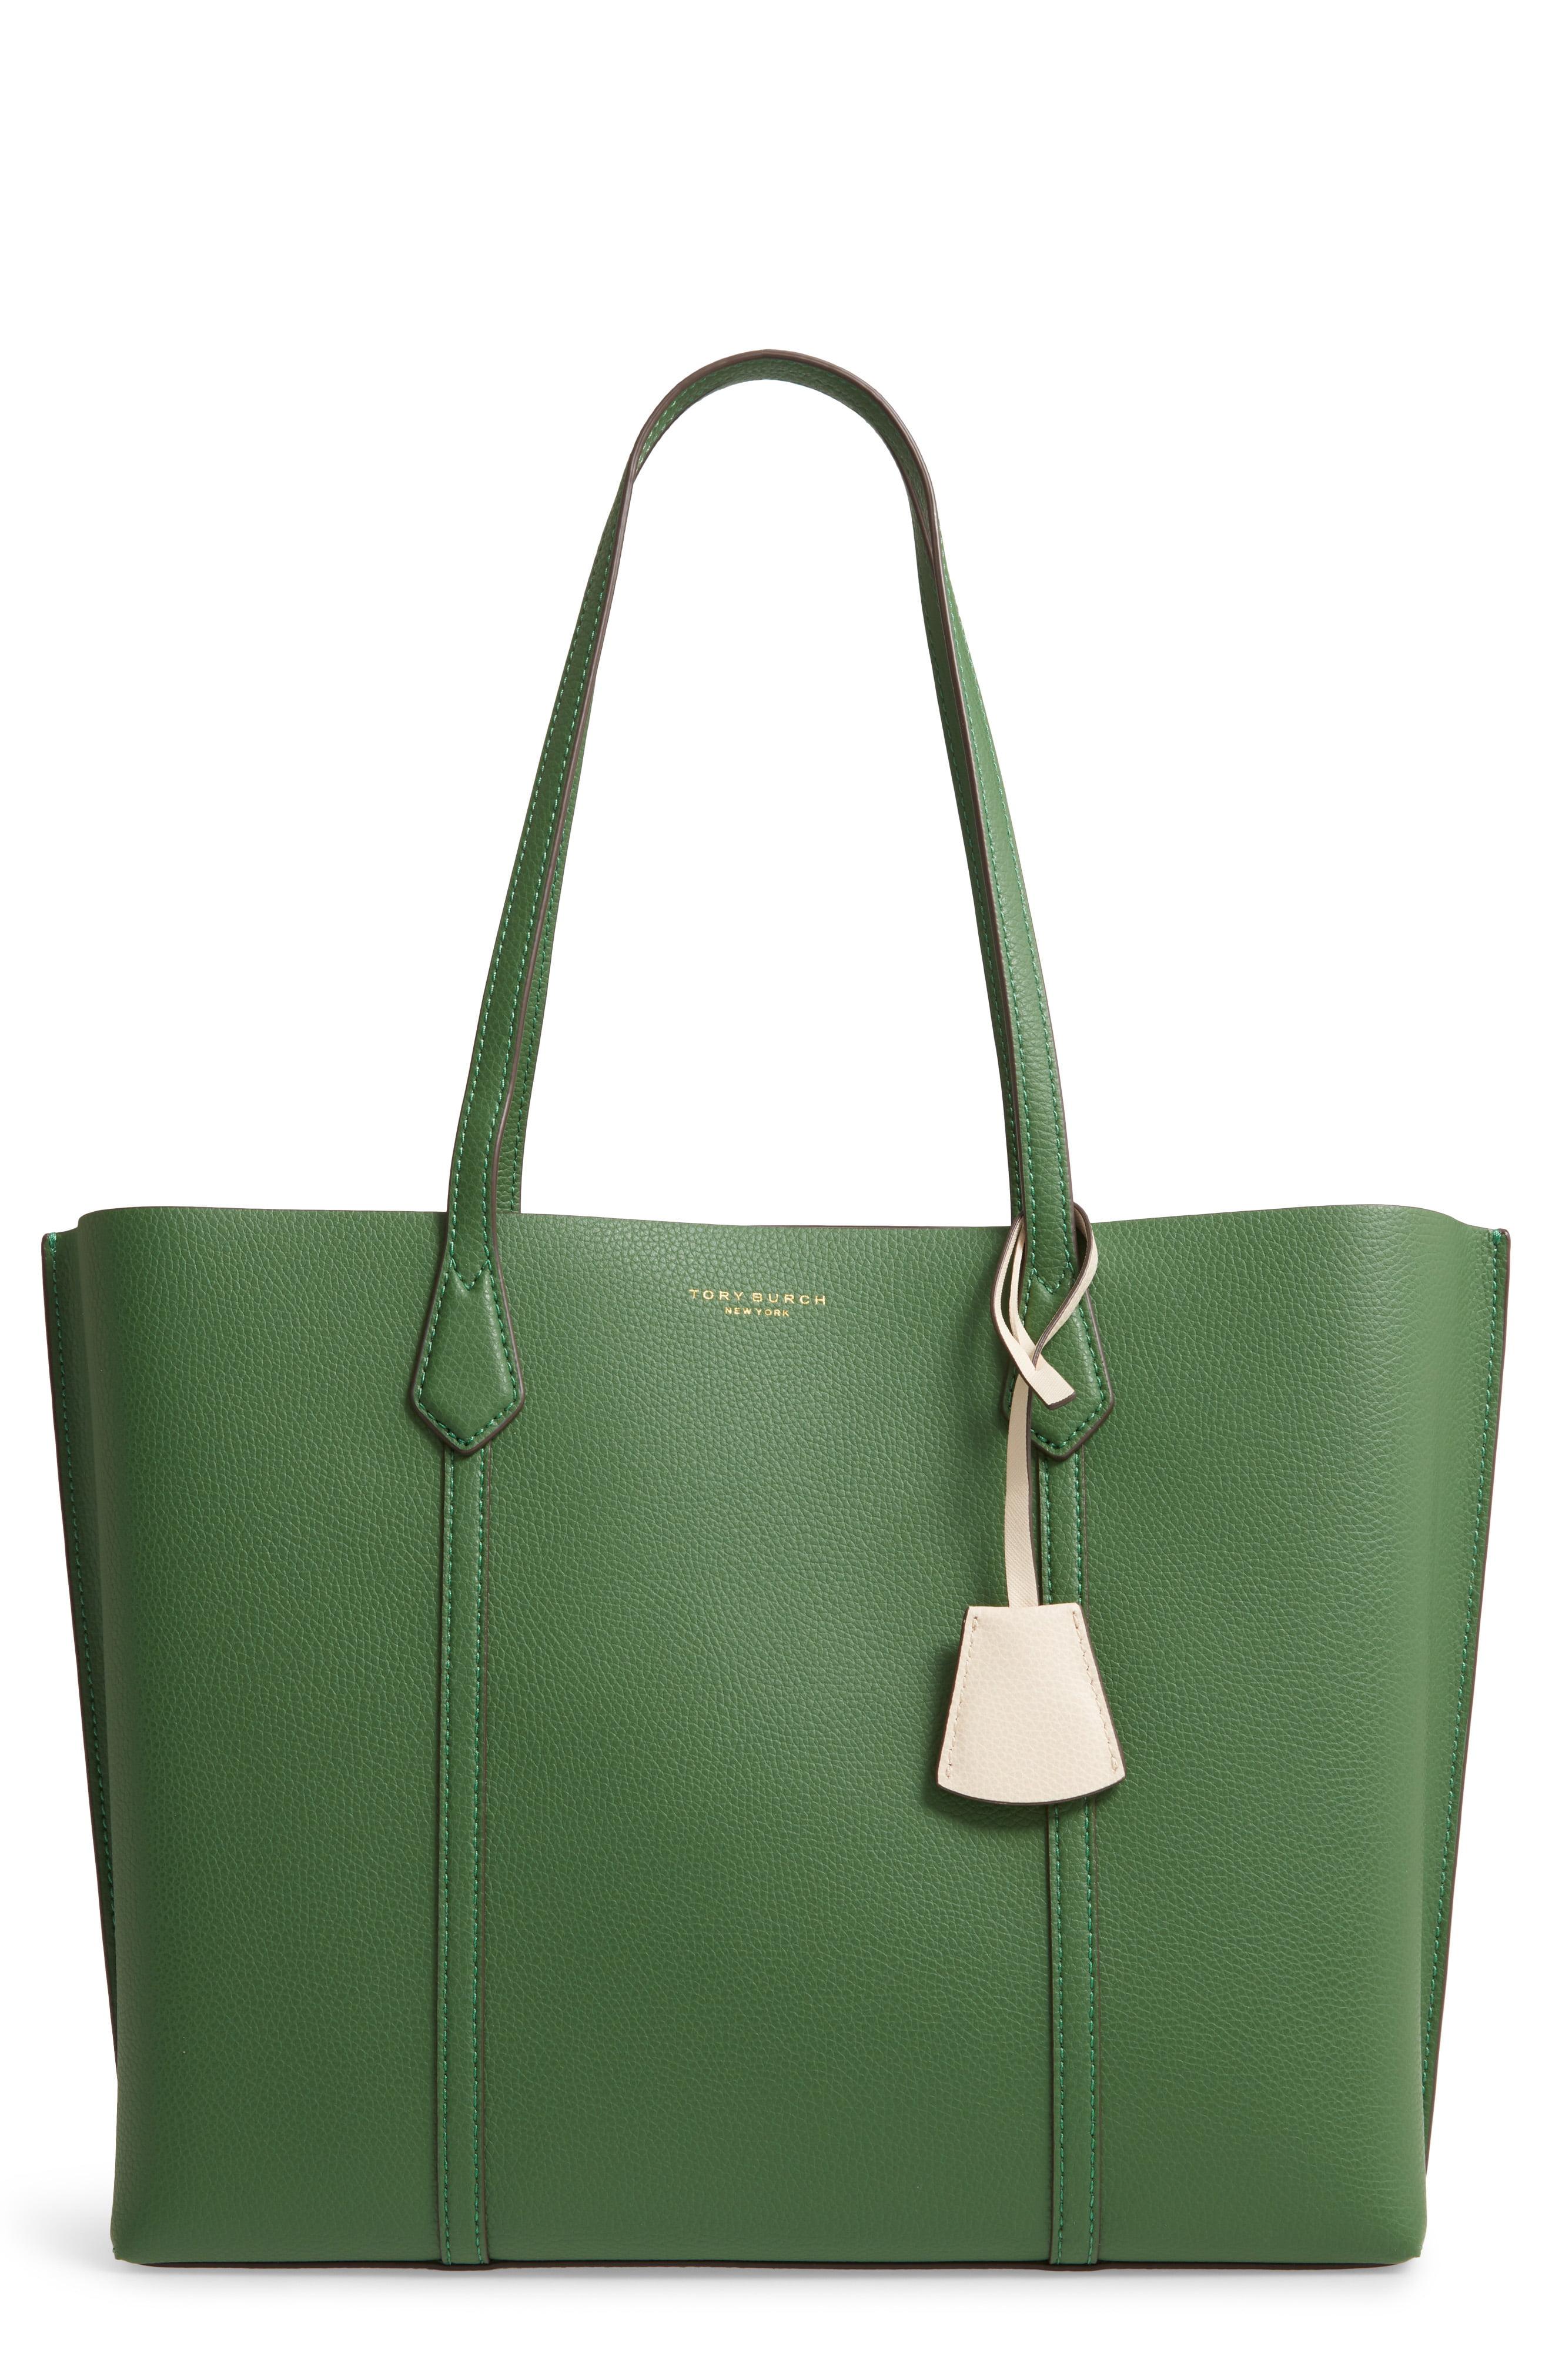 Tory Burch Leather Perry Triple-compartment Tote in Green - Save 40% - Lyst